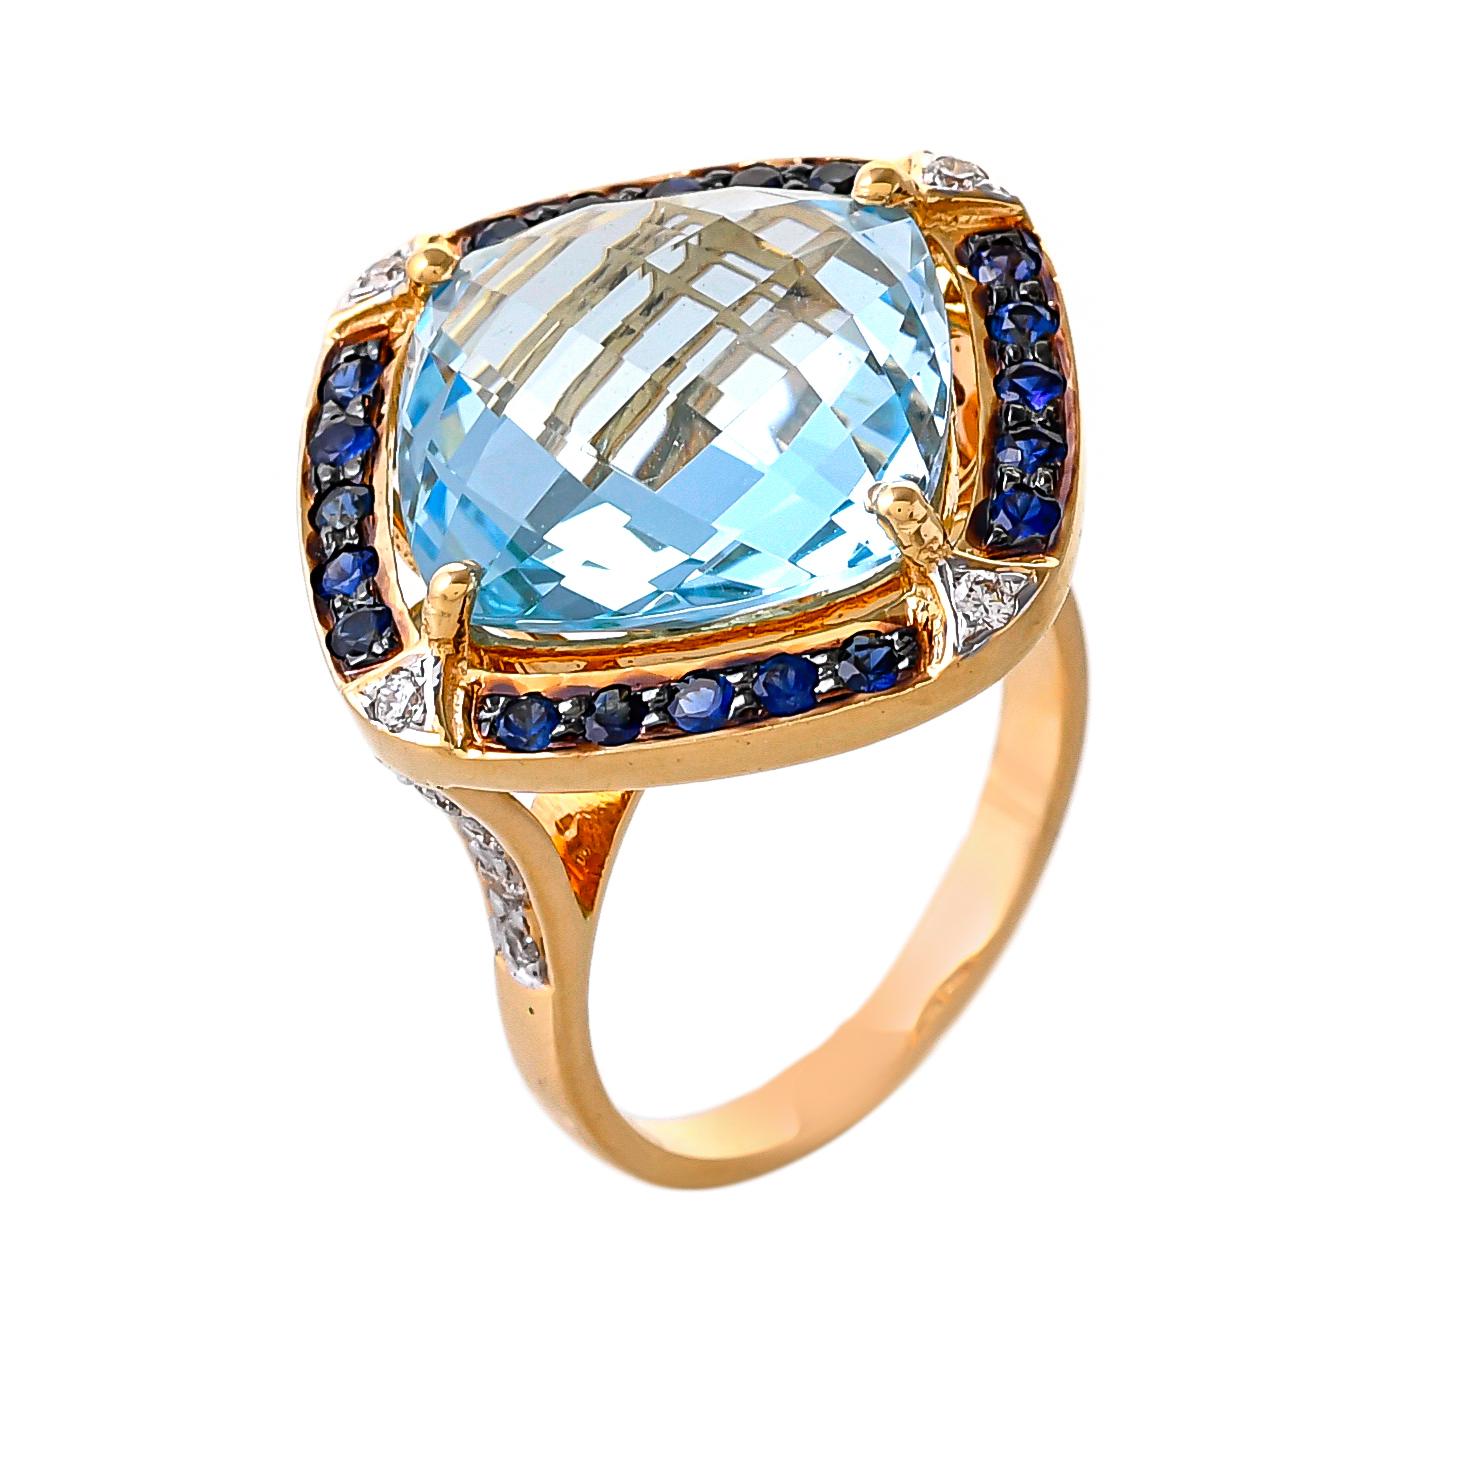 Briolette Cut 12.61 Carat Sky Blue Topaz Blue Sapphire and Diamond 18kt Yellow Gold Ring For Sale